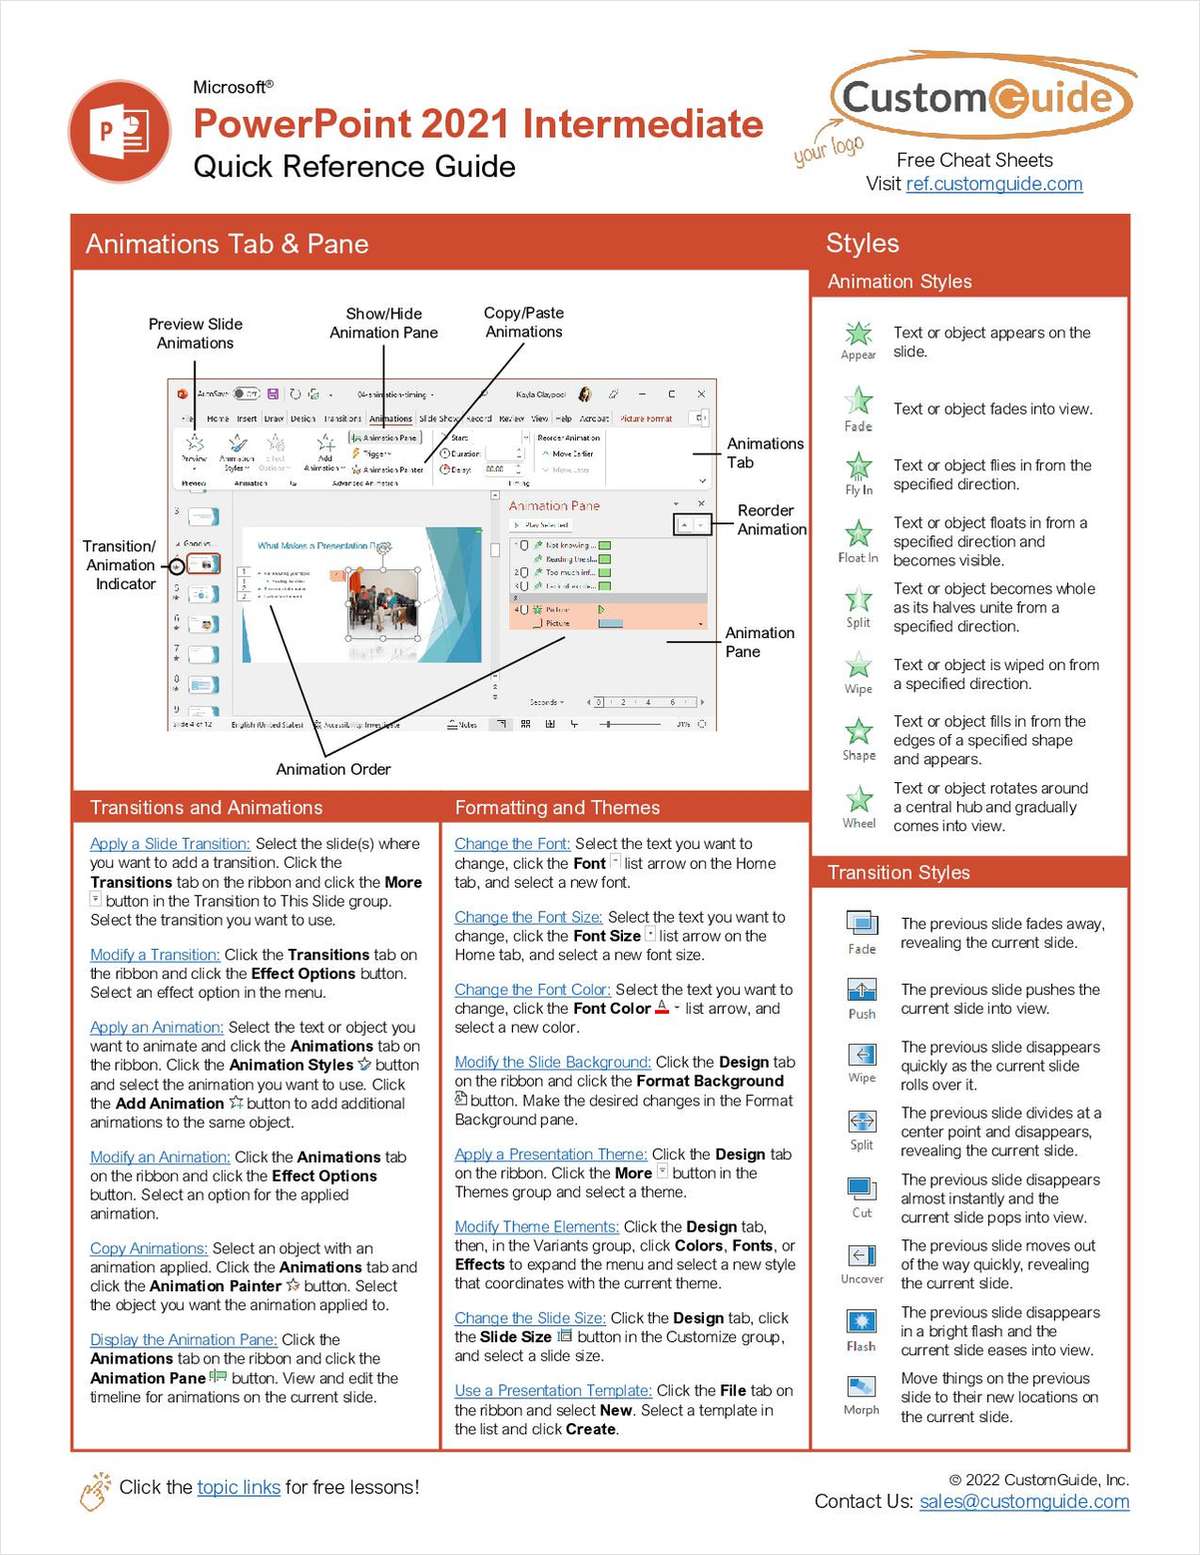 Microsoft PowerPoint 2021 Intermediate Quick Reference Card Free Guide